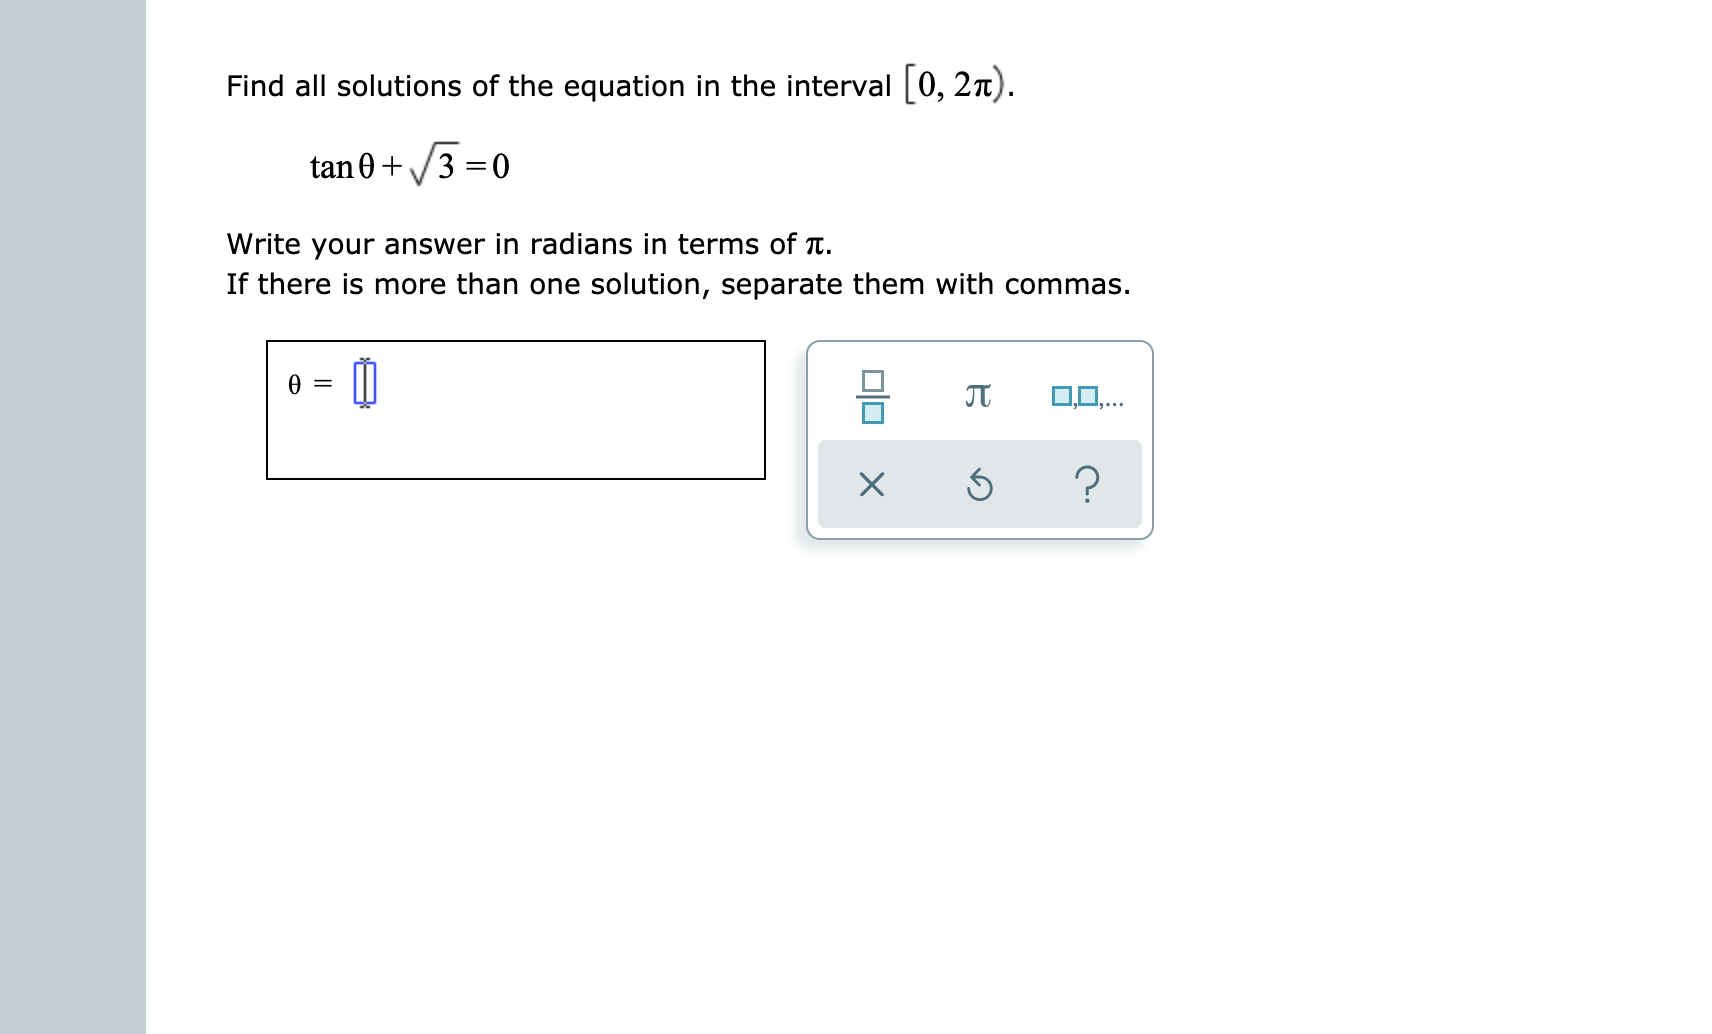 Find all solutions of the equation in the interval[0, 2n).
tan03 0
Write your answer in radians in terms of Tt
If there is more than one solution, separate them with commas
O0,..
?
X
